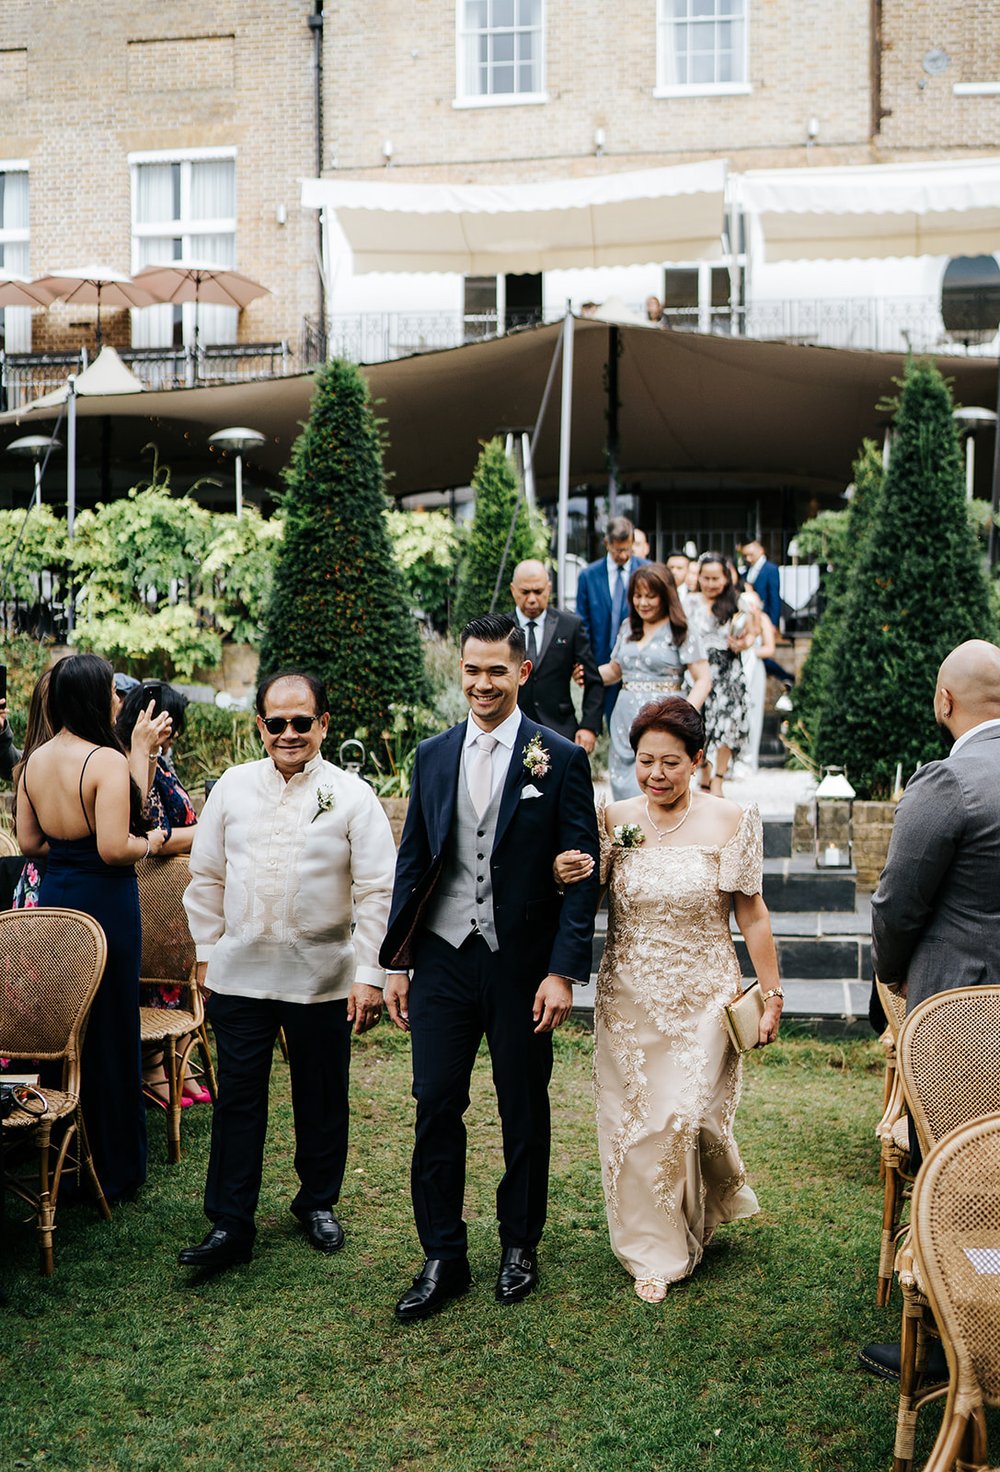 Groom walks down the aisle during outdoor ceremony at Bingham Riverhouse and is flanked by his mother and father